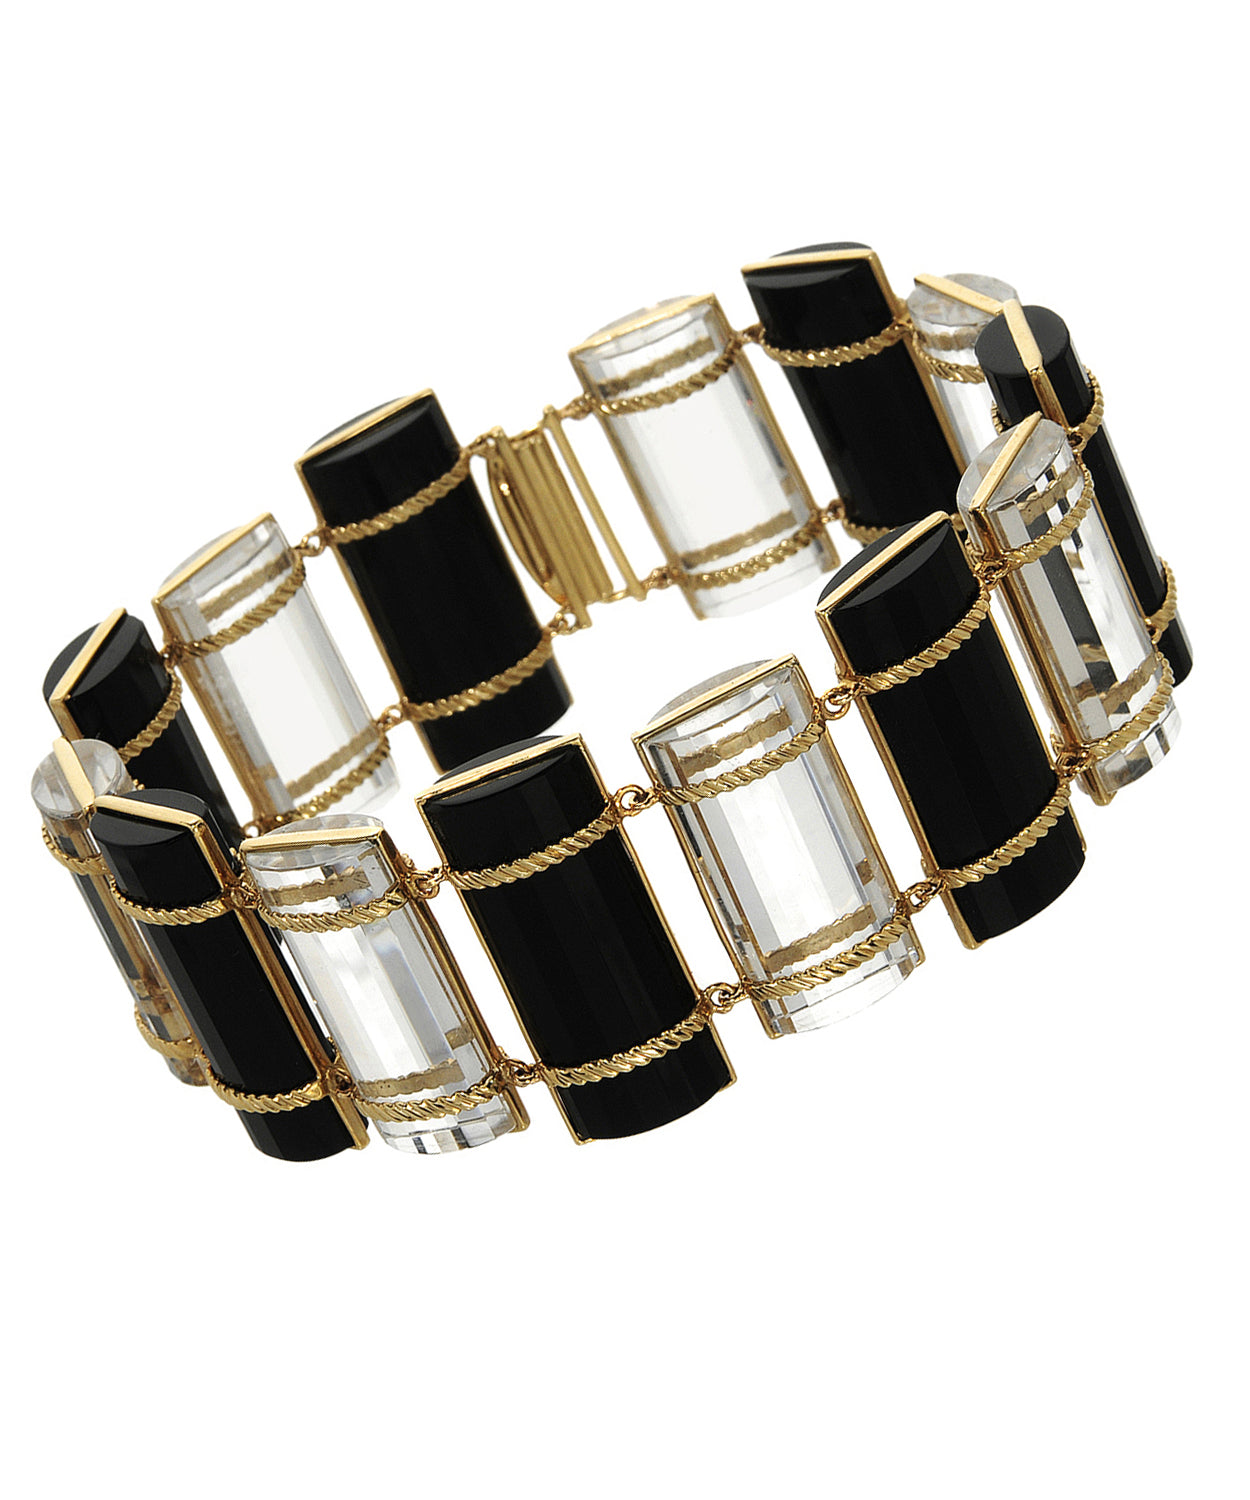 Glamour Collection 215.40 ctw Natural Black Onyx and Quartz 14k Yellow Gold Bar Bracelet View 1